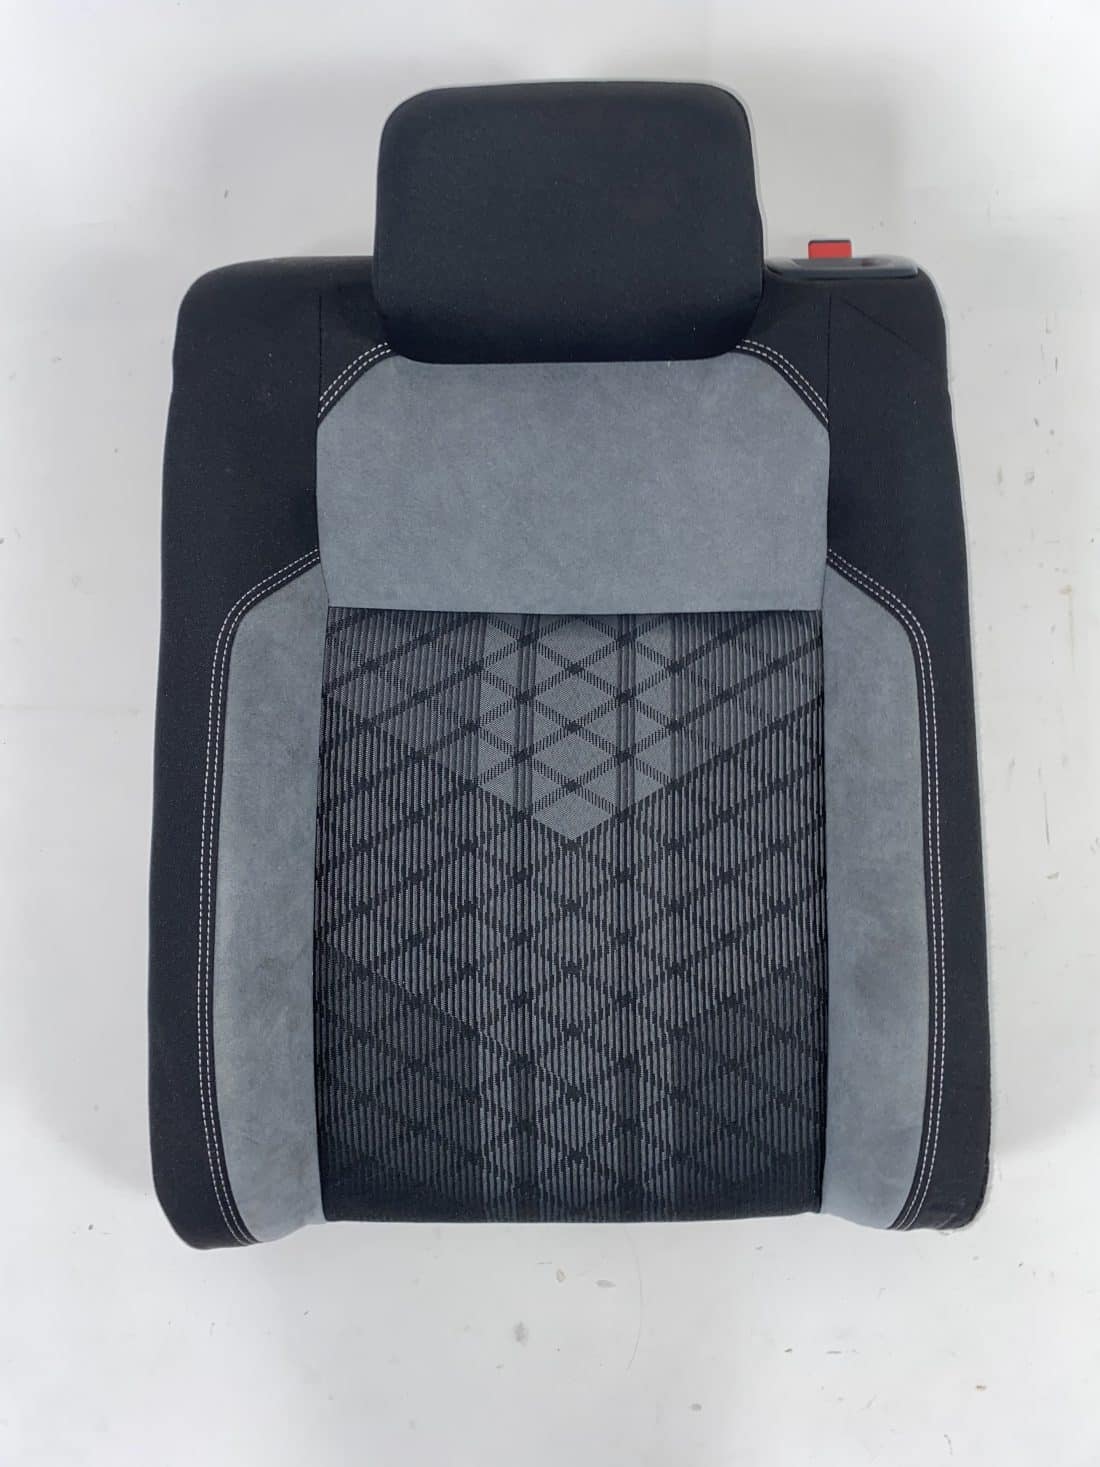 Trp Post Container Data Trp Post Id 10320 Interior Vw Polo 6r Aw Fabric Alcantara Black Grey Trp Post Container